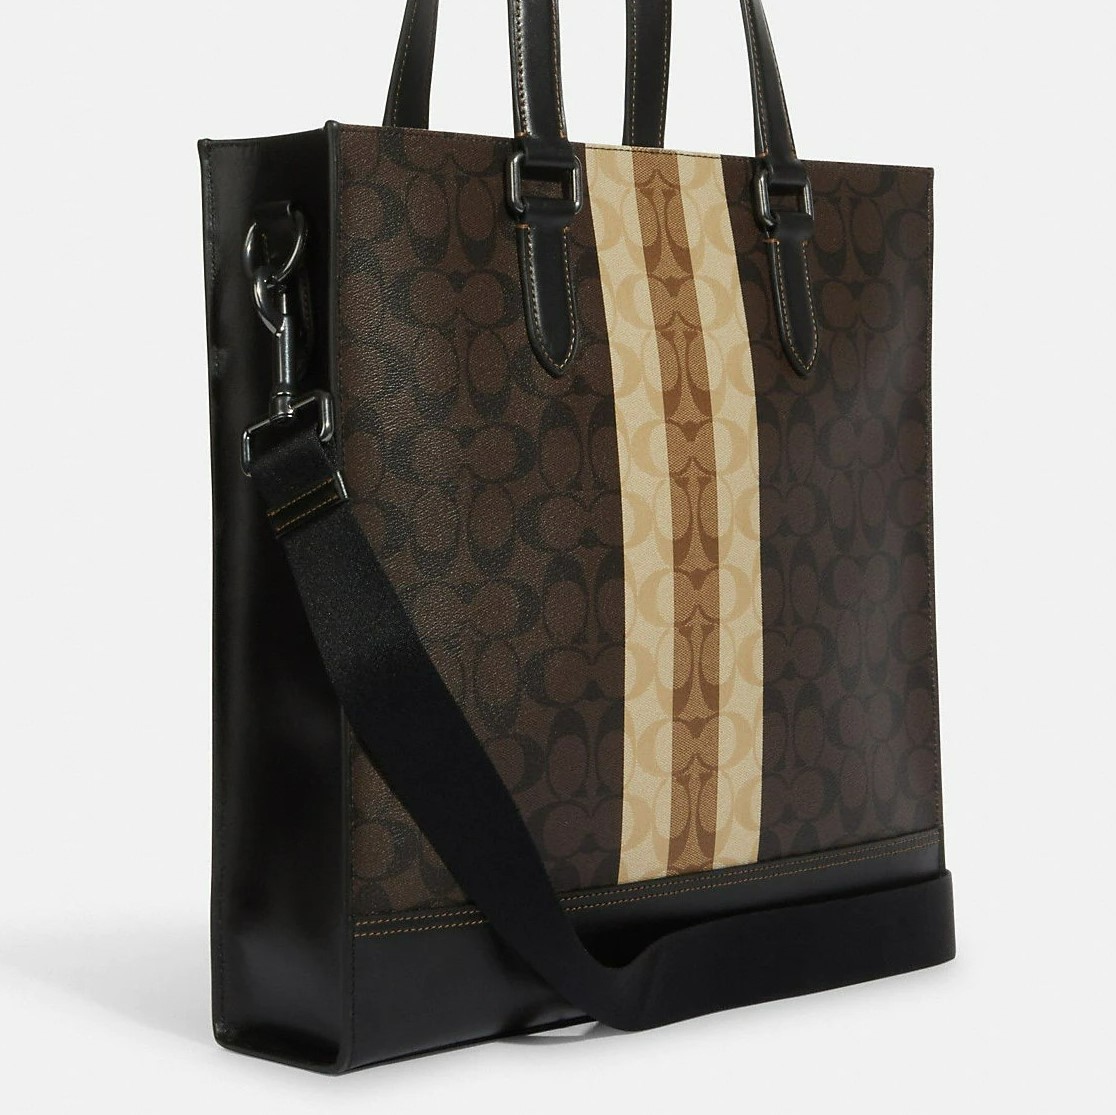 TÚI XÁCH COACH GRAHAM STRUCTURED TOTE IN BLOCKED SIGNATURE CANVAS WITH VARSITY STRIPE 8